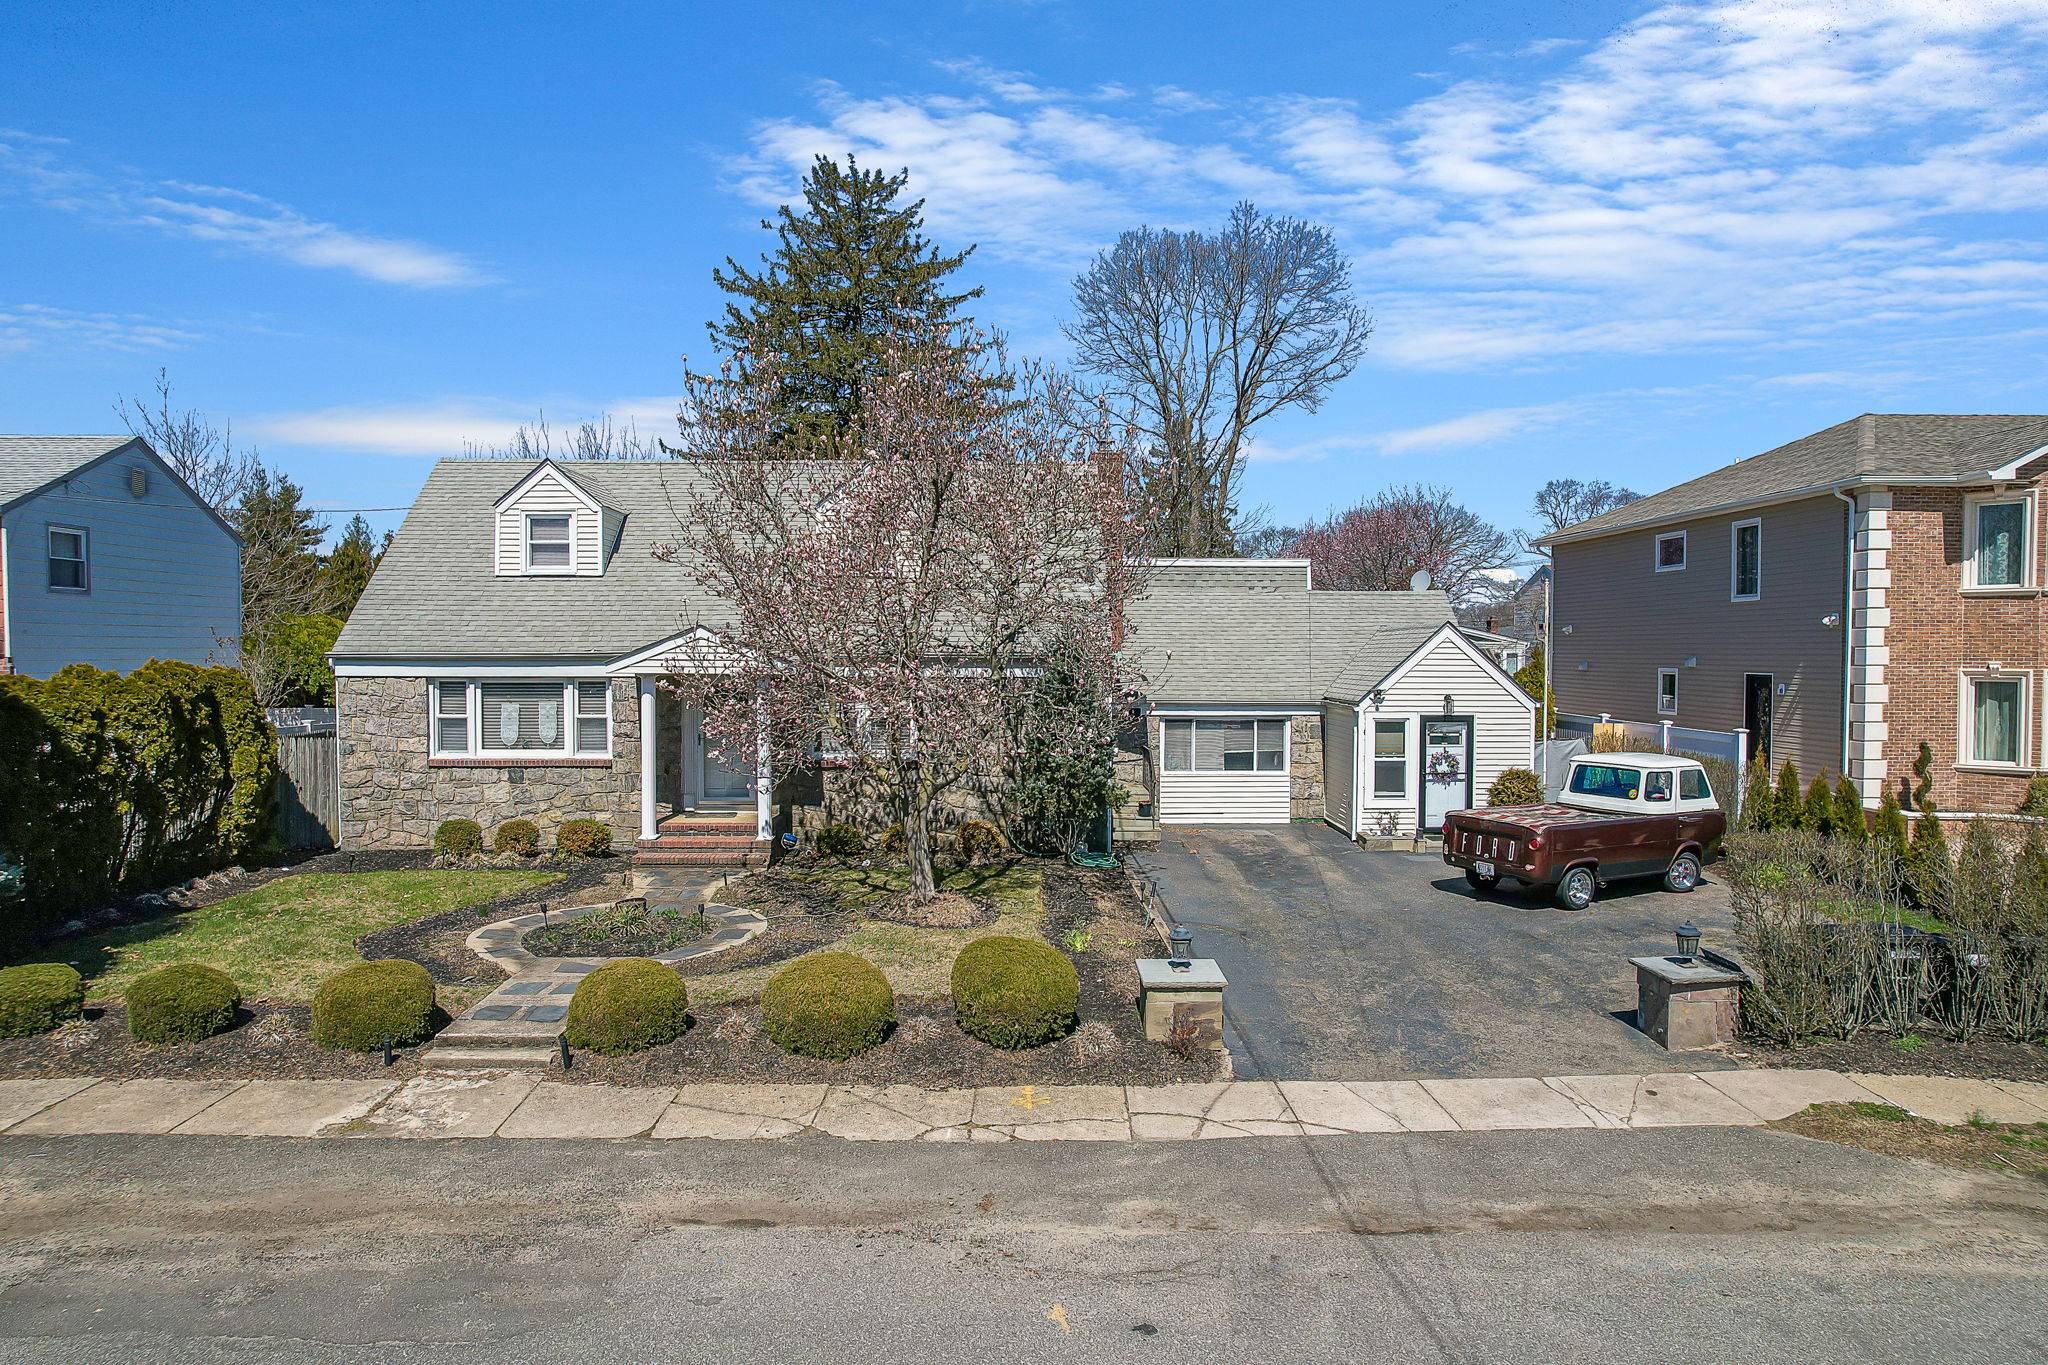 GENERATIONAL HOME IN NORTH BELLMORE